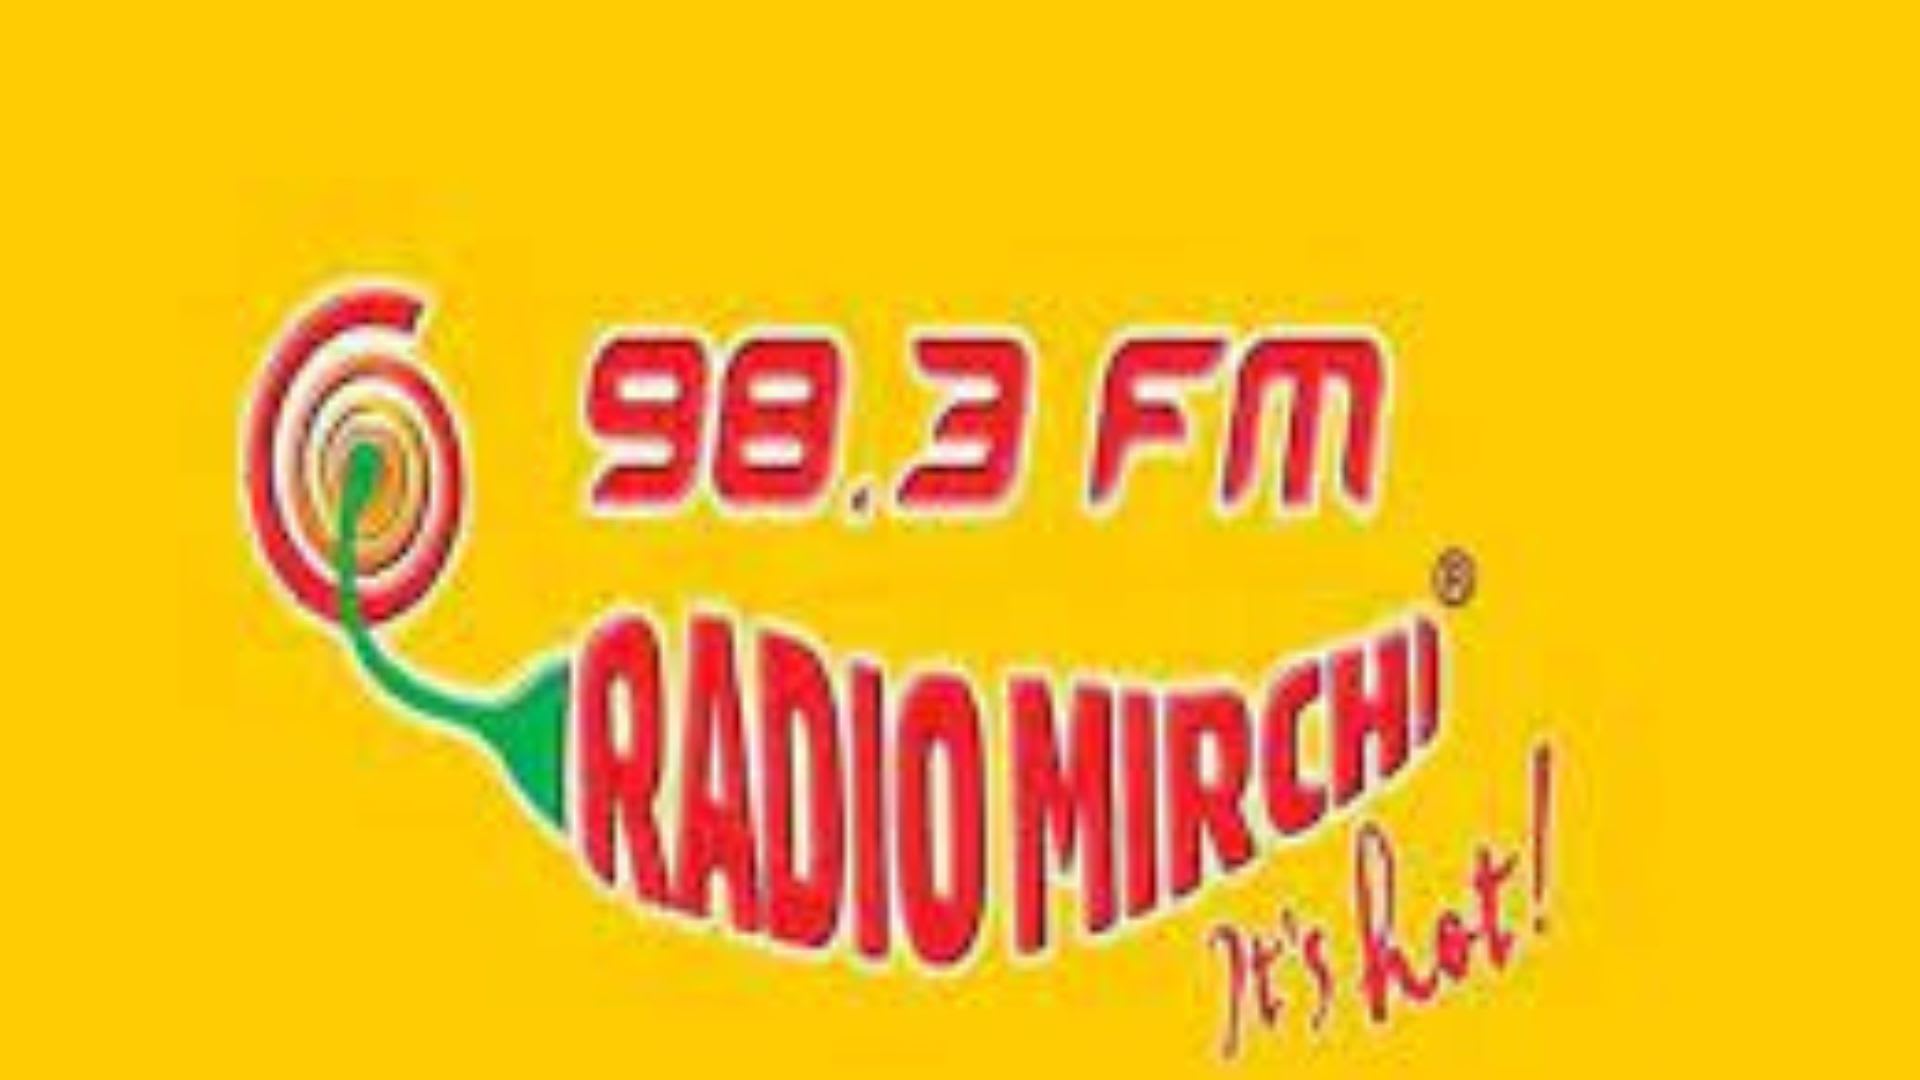 stick gene Photo Put your song in rotation airplay on radio mirchi 98,3 fm radio station  live by Luara_mora | Fiverr